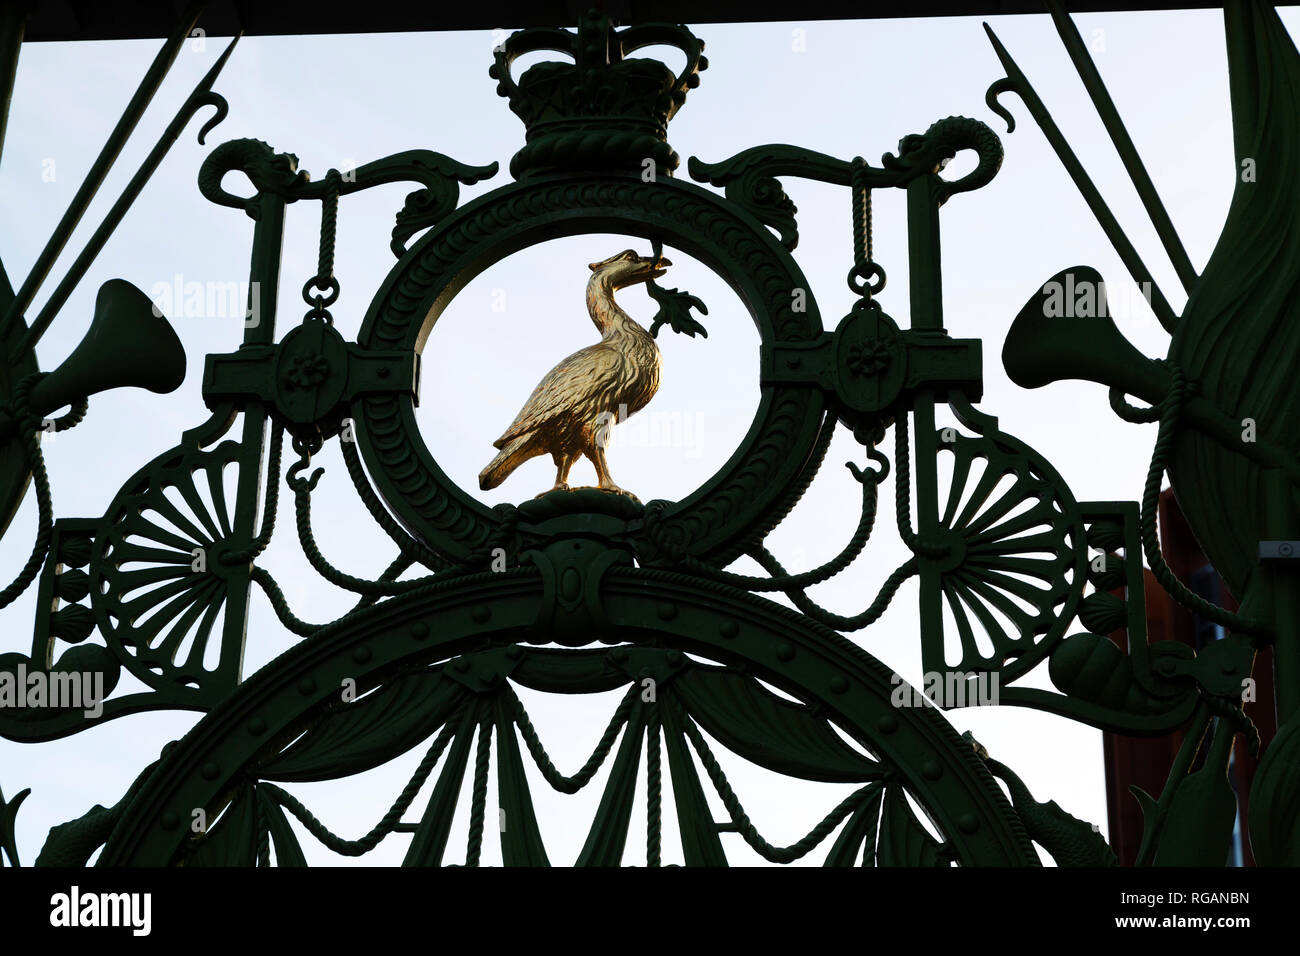 A Liver Bird on wrought iron gates in Liverpool, England. The mythical creature is a symbol of the city. Stock Photo